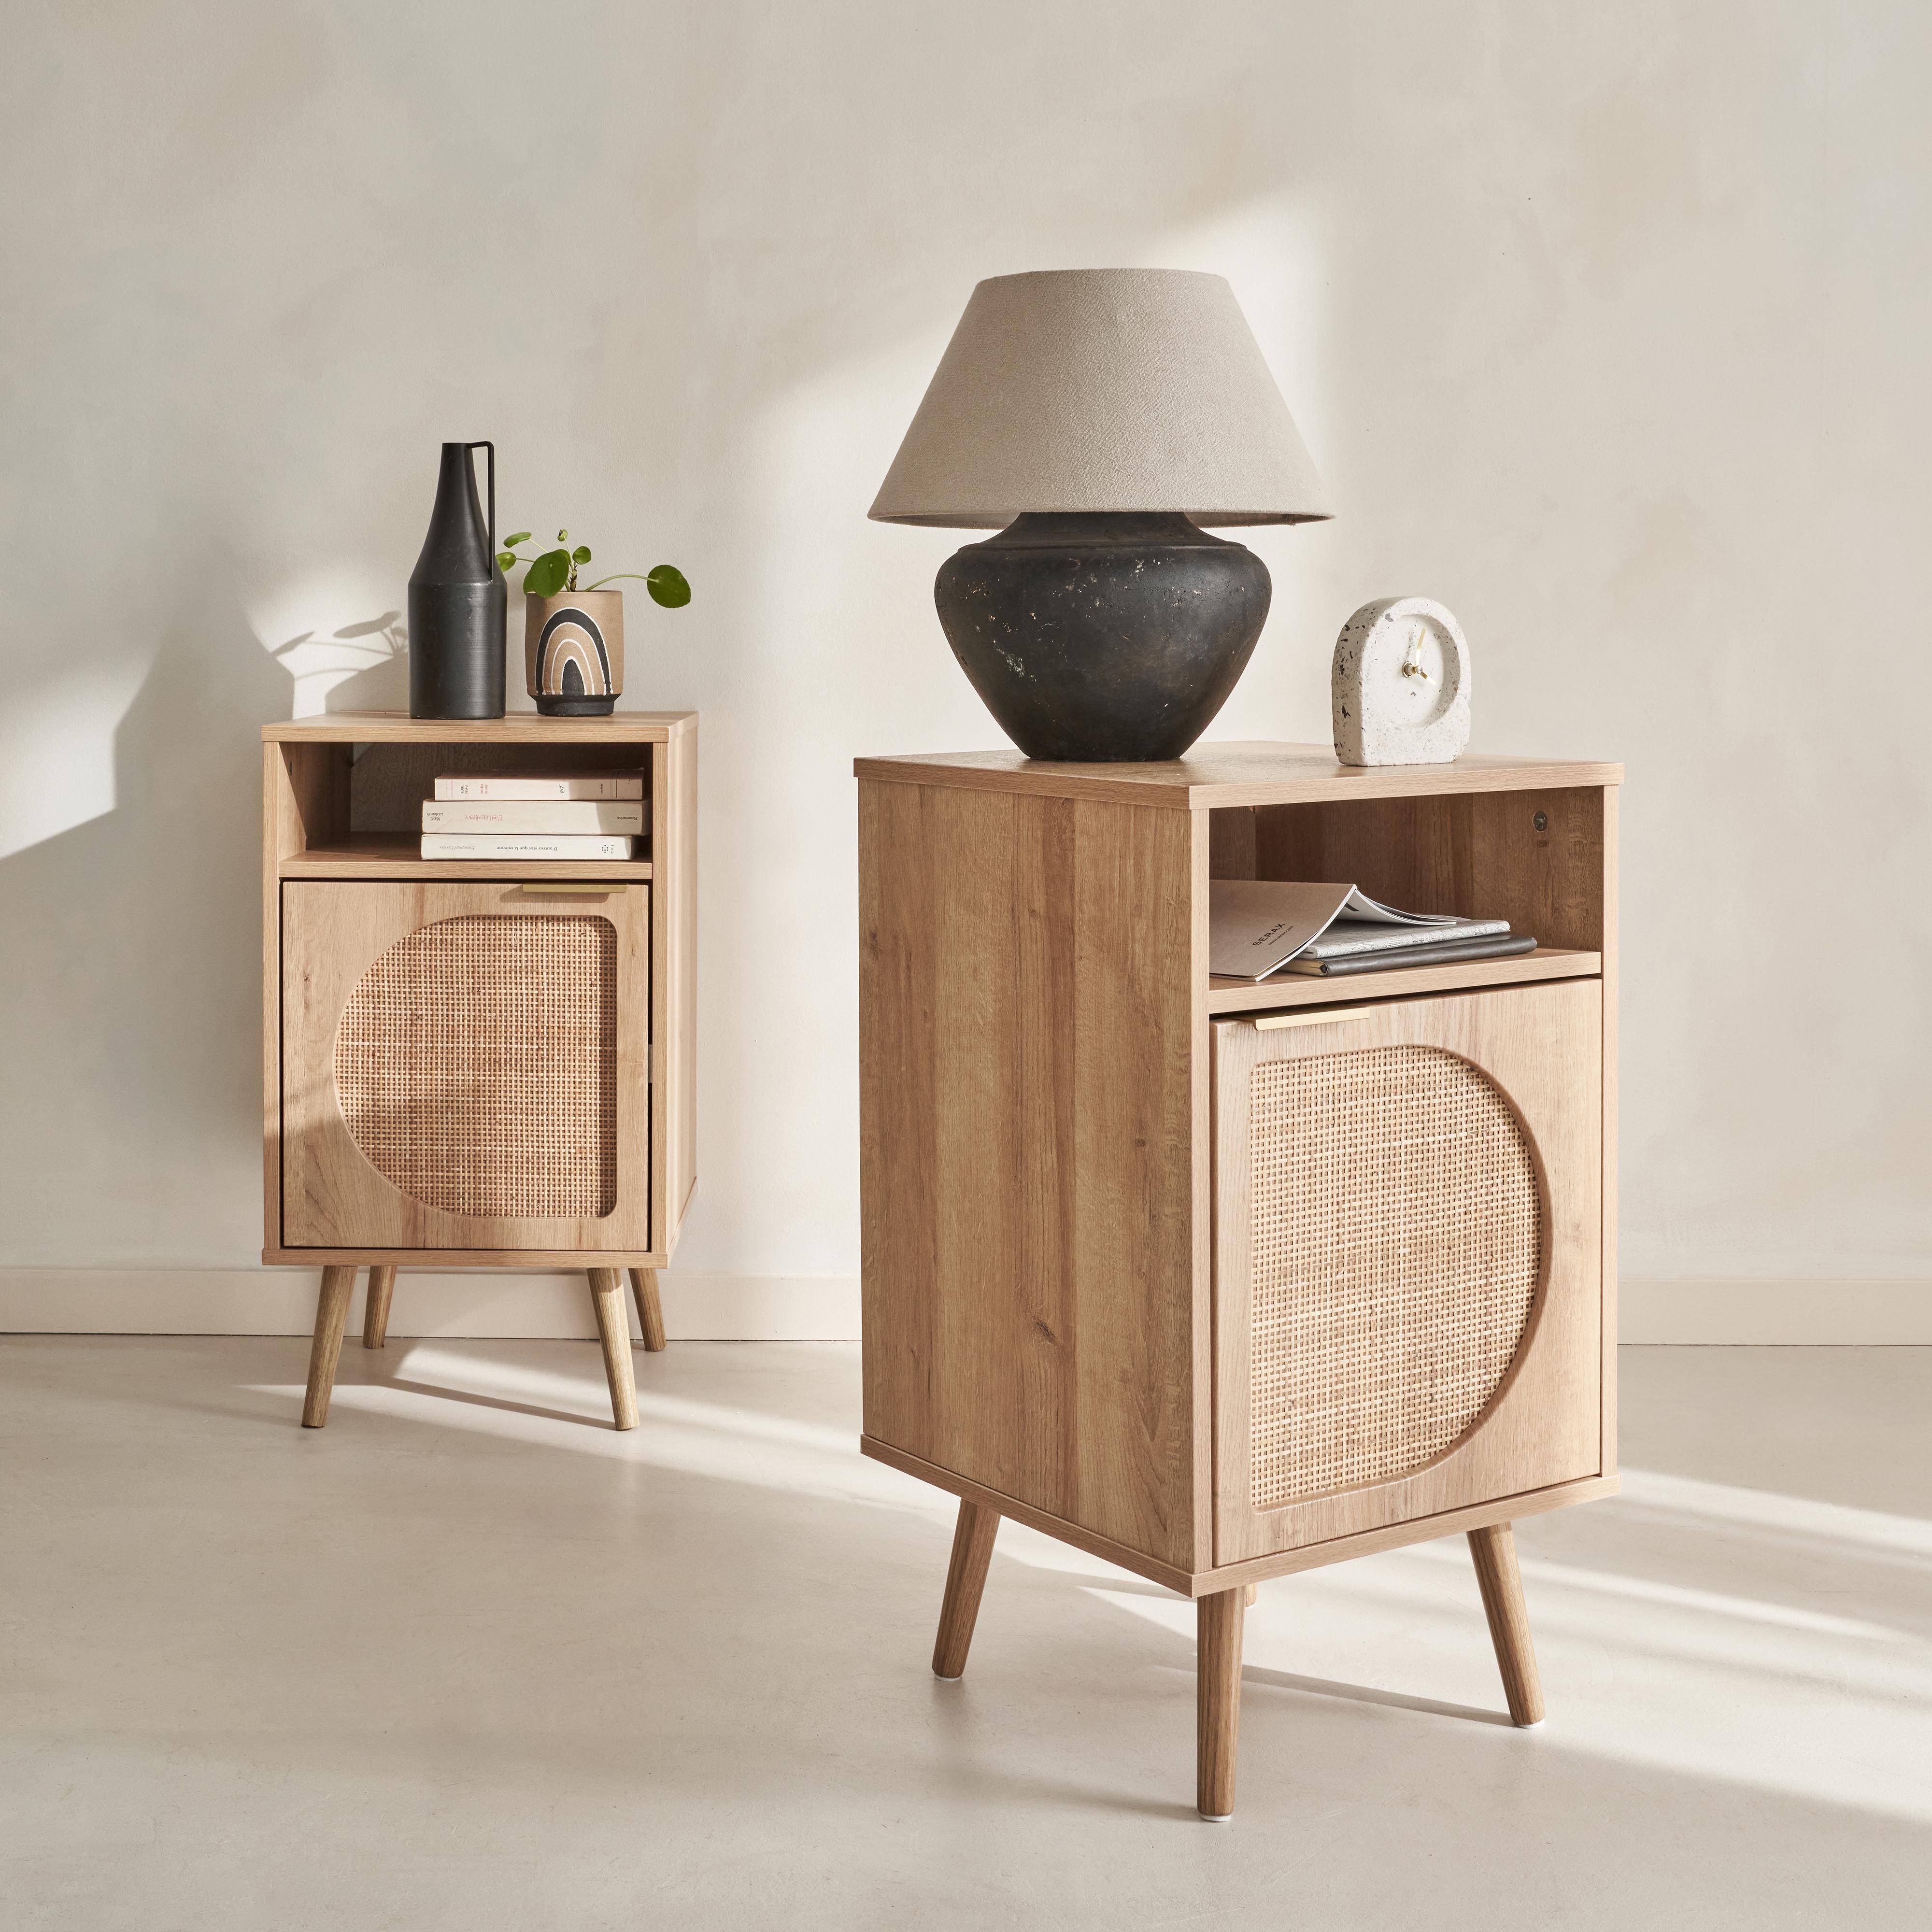 Pair of wood and rounded cane rattan bedside tables, 40x39x65.8cm, Eva, 1 cupboard, 1 storage space each,sweeek,Photo1